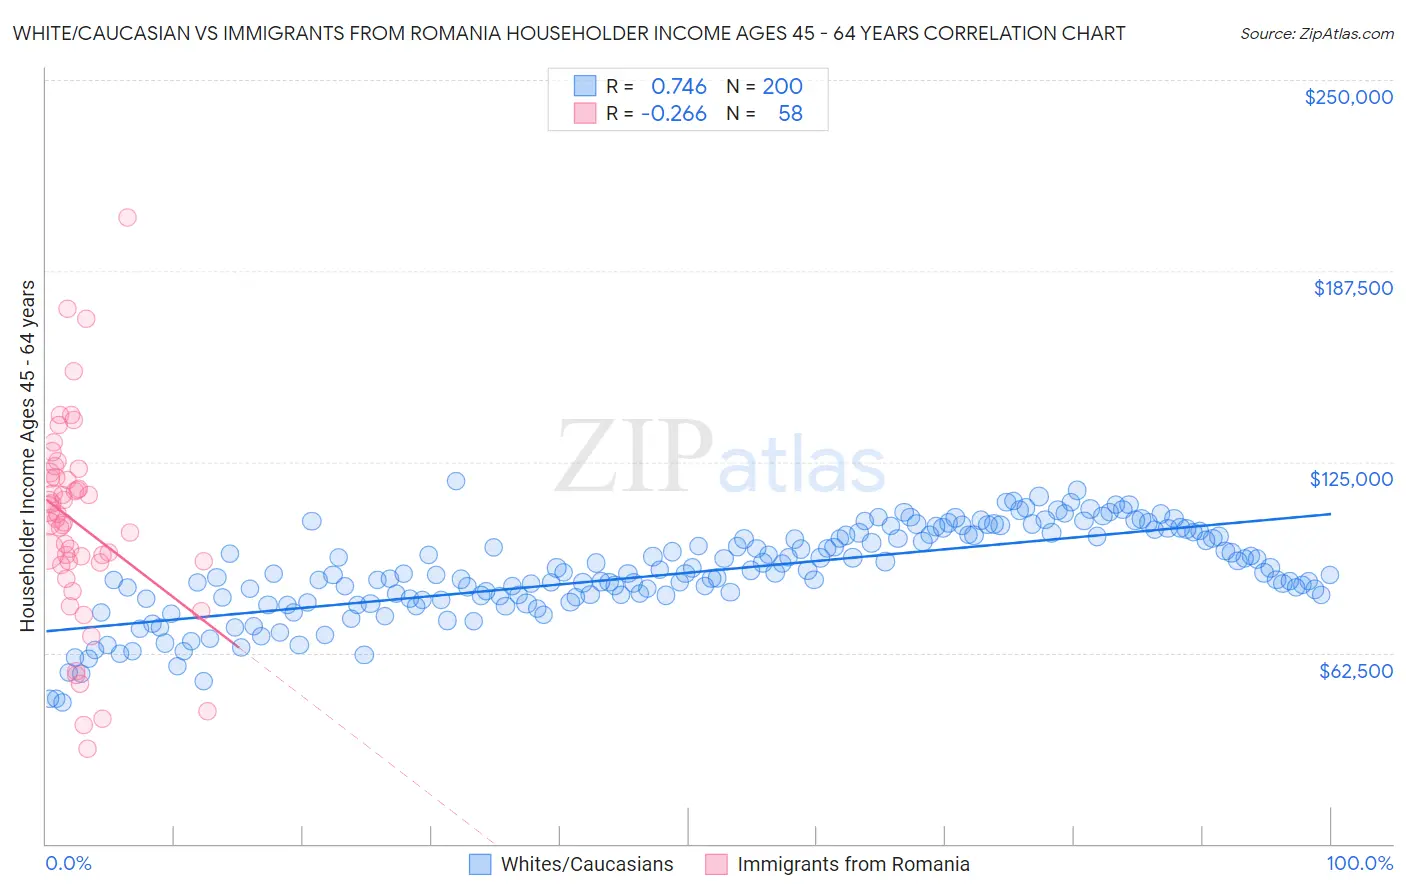 White/Caucasian vs Immigrants from Romania Householder Income Ages 45 - 64 years